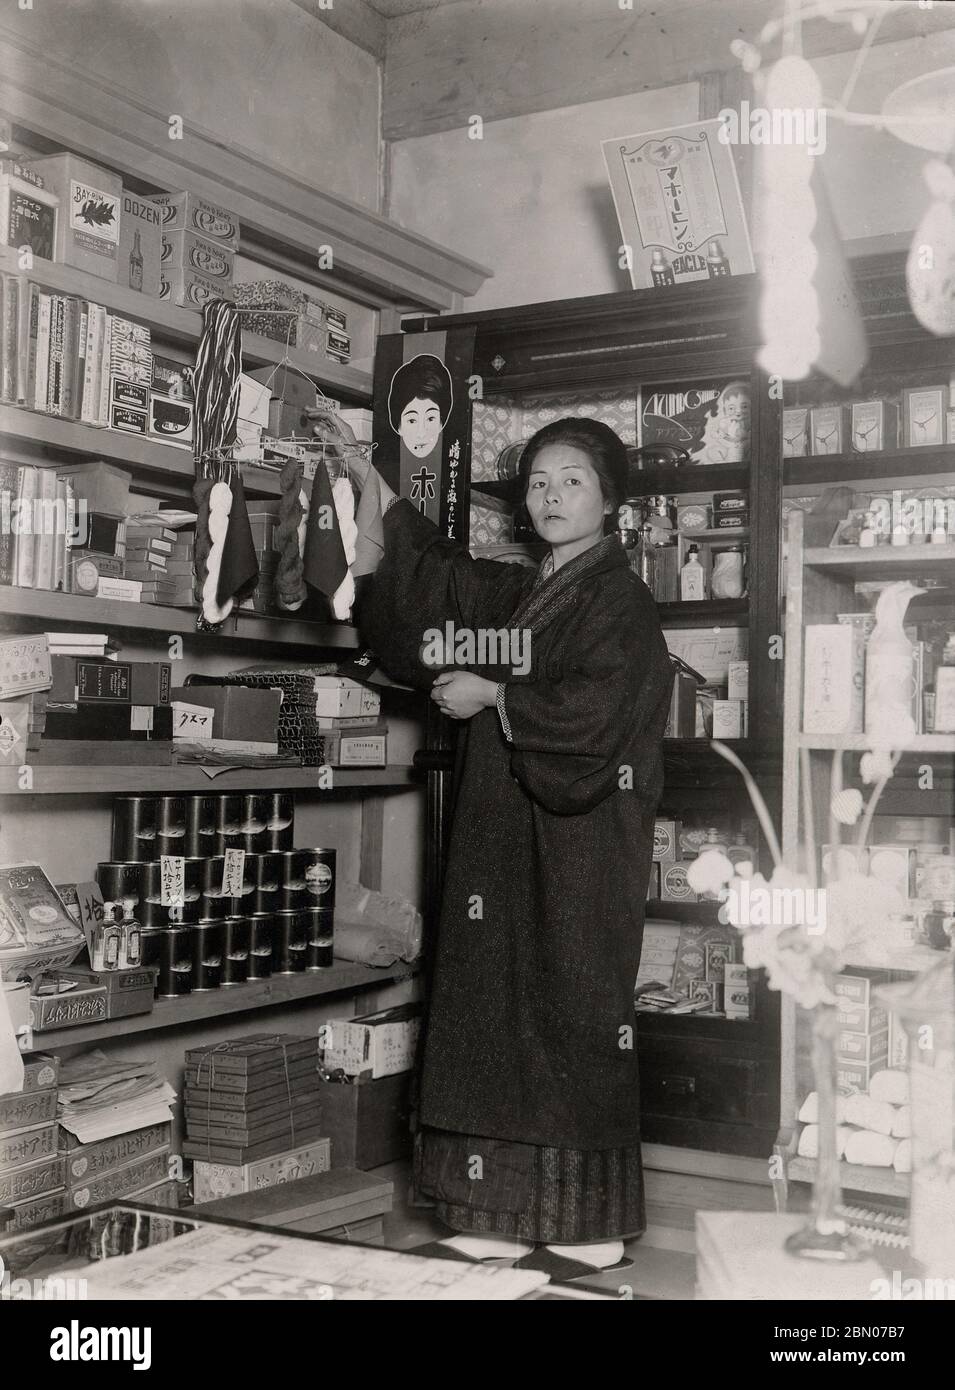 [ 1925 Japan - Shop for Women's Political Movement ] —   Shop to obtain funds for the women's political movement in Japan, 1925 (Taisho 14).  The shopkeeper is identified as Mrs. K. Kawamoto.  Women's advocacy started in Japan in the nineteenth century, but aggressive politicking for women's suffrage didn't start until the 1920s.  Japanese women were finally granted the right to vote under a new (US-drafted) constitution in 1946 (Showa 21).  20th century gelatin silver print. Stock Photo